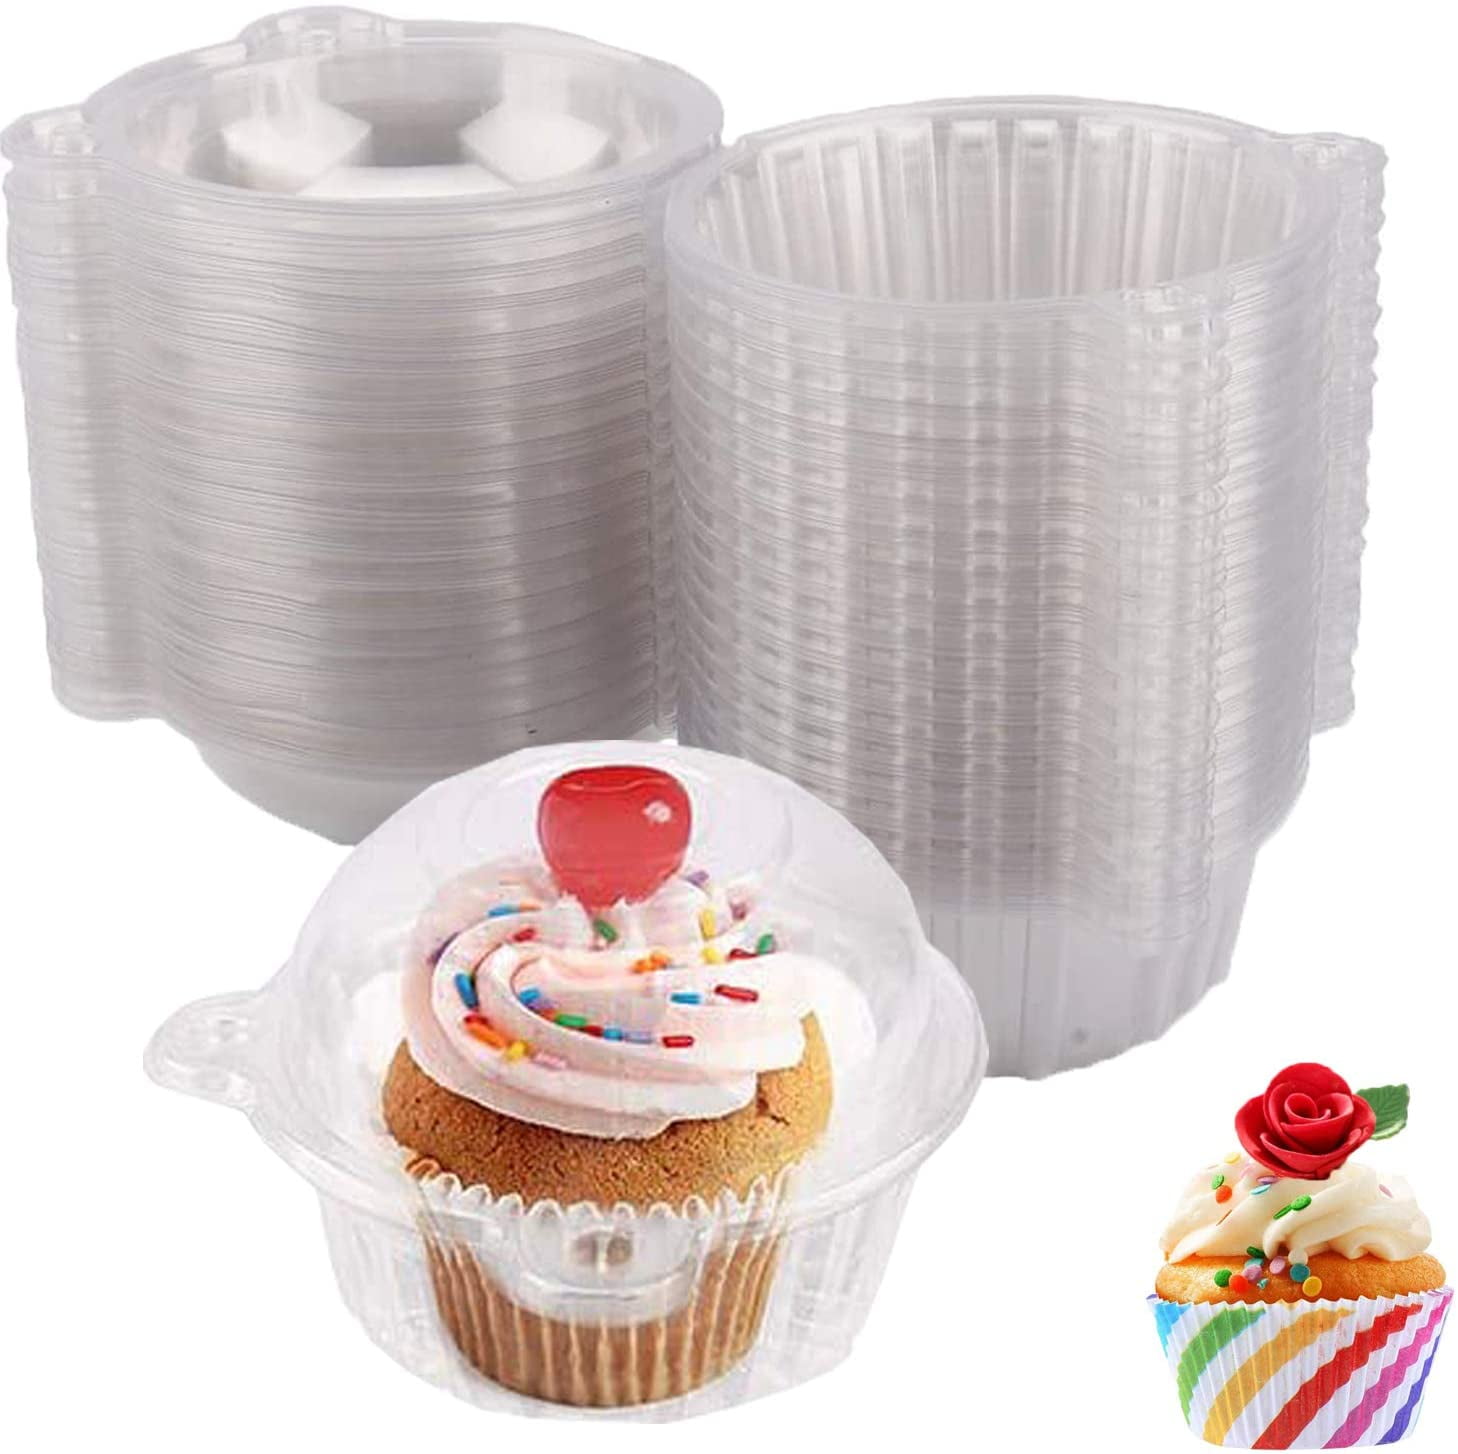 100pcs  Plastic Single Cupcake /Muffin Cases Pods Party Cup Cake Day Boxes 